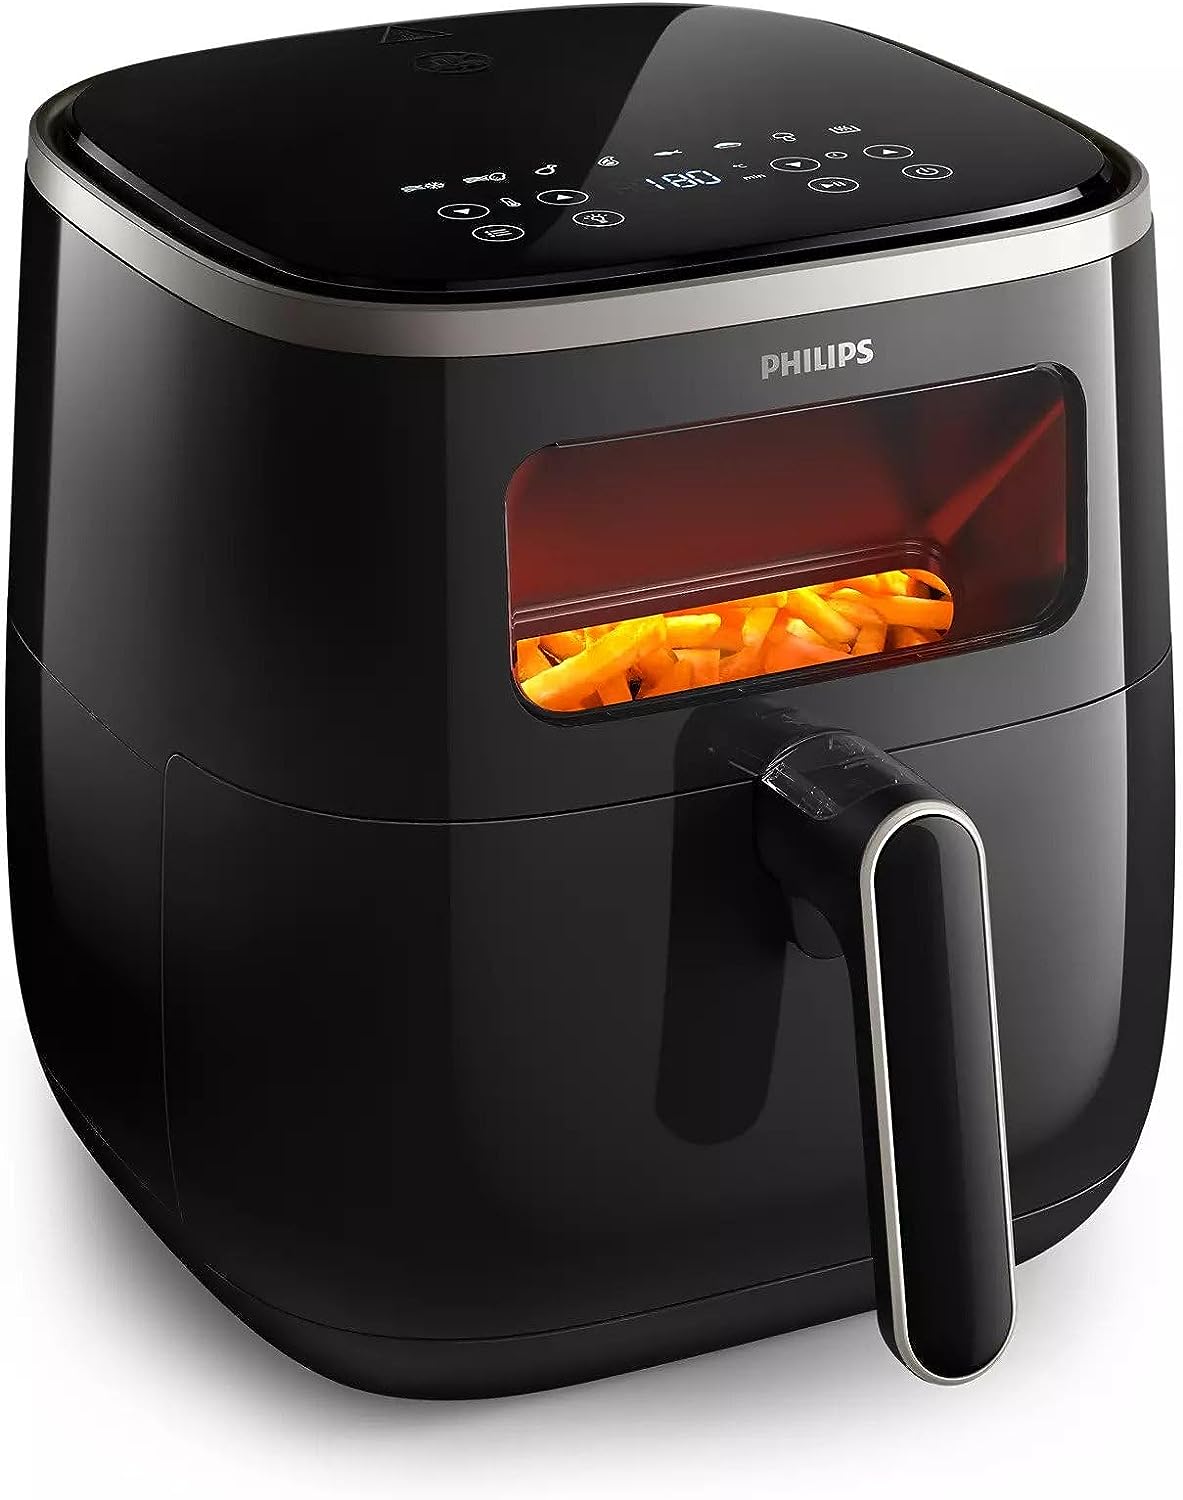 Philips Essential Airfryer Compact vs Philips Philips 3000 Series Airfryer  Compact: What is the difference?